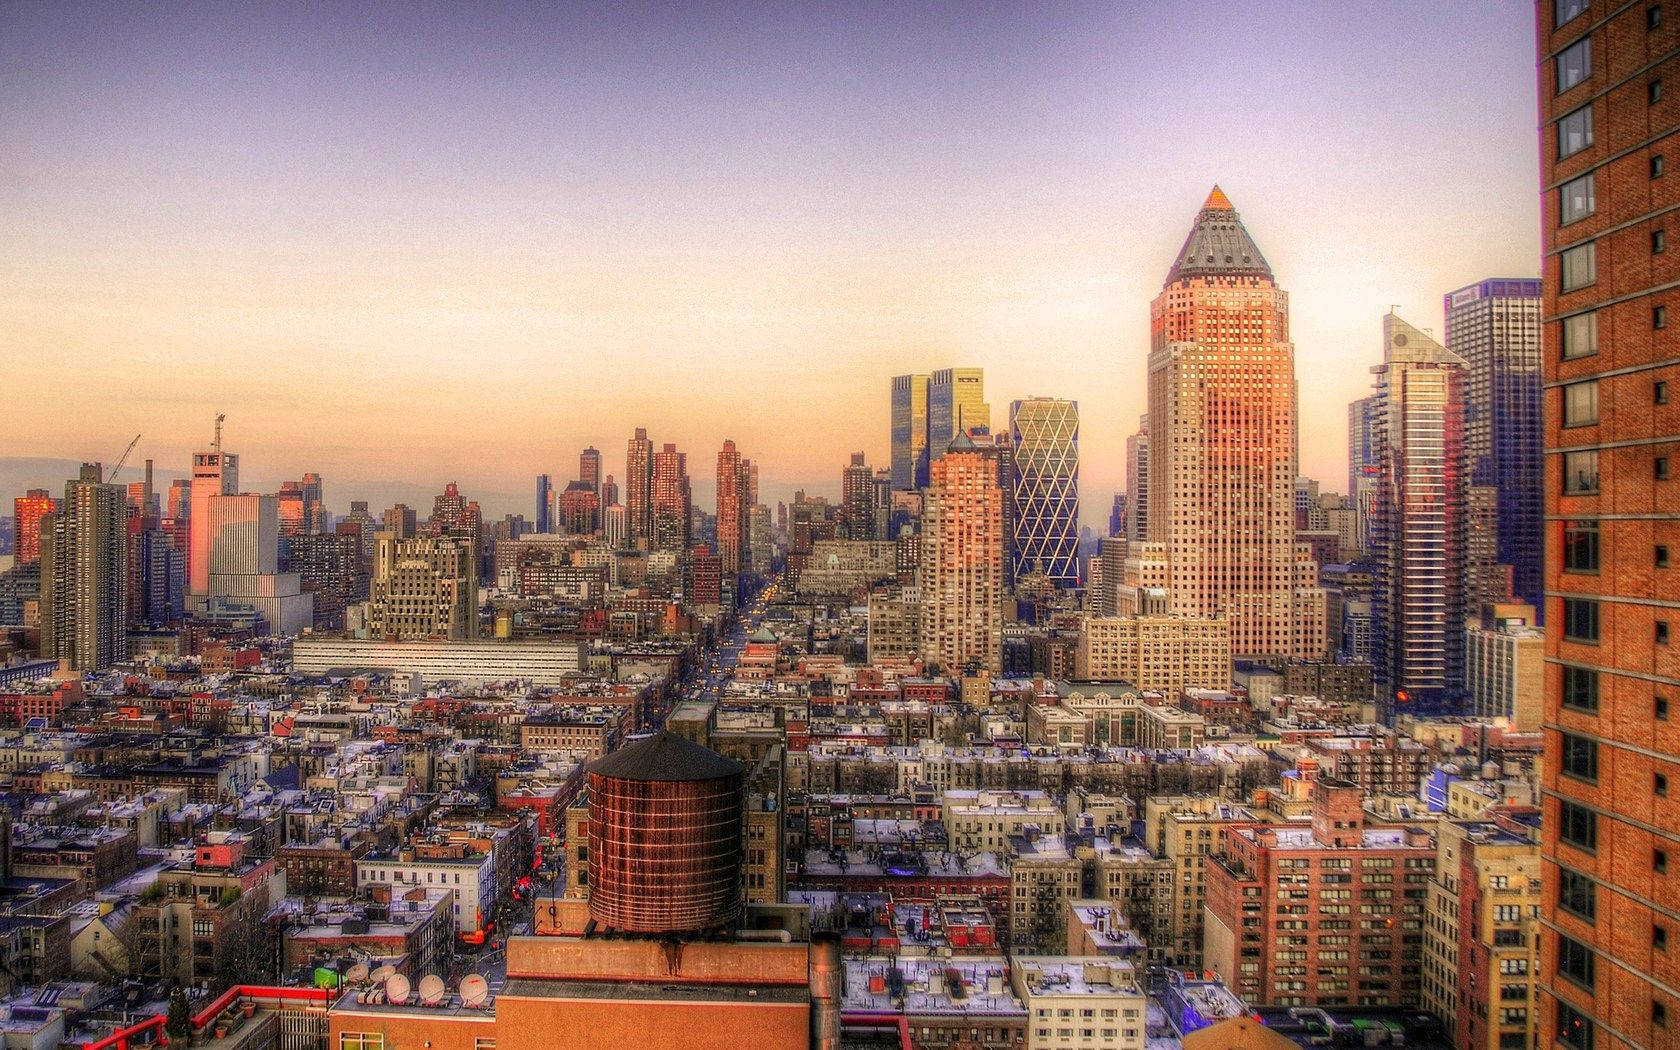 New York City Buildings At Sunset Drone Shot